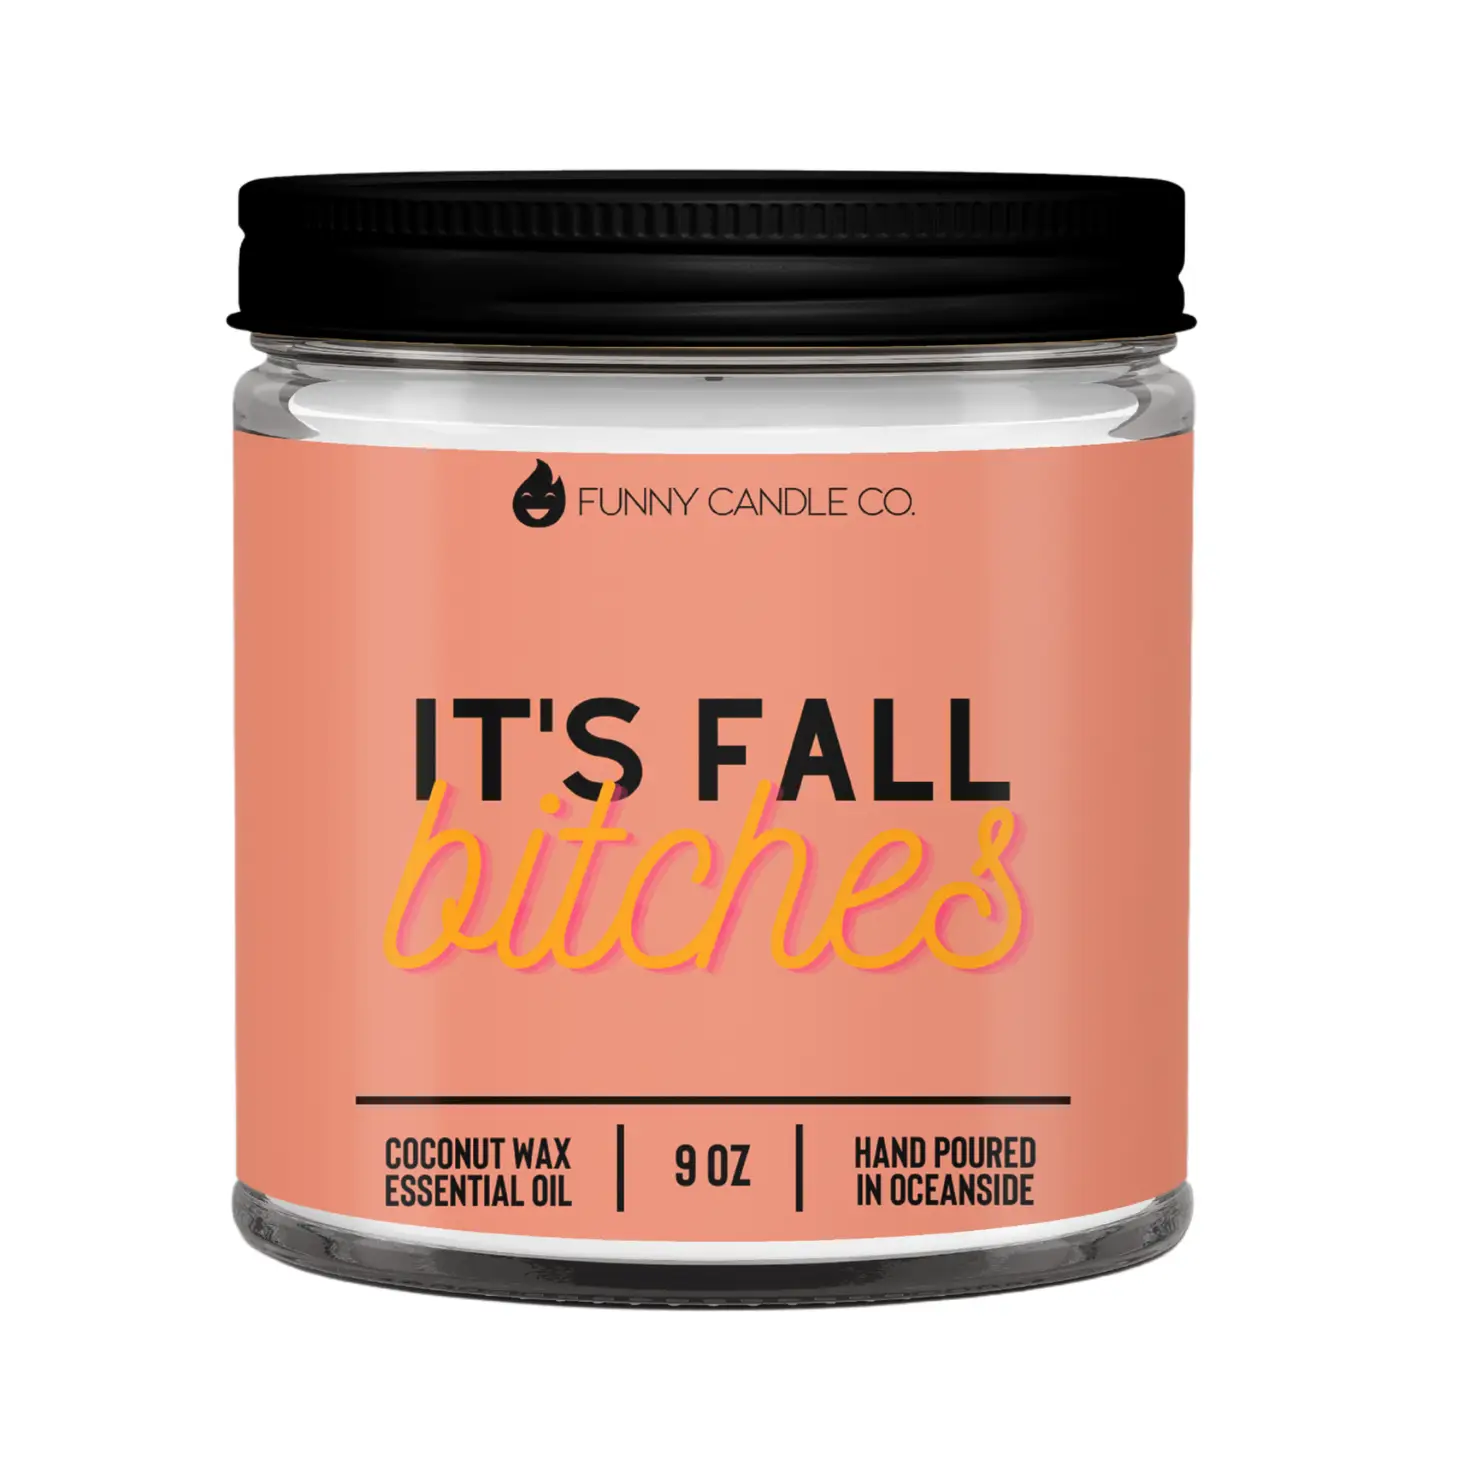 It's Fall Bitches- 9 oz funny candle gift for fall